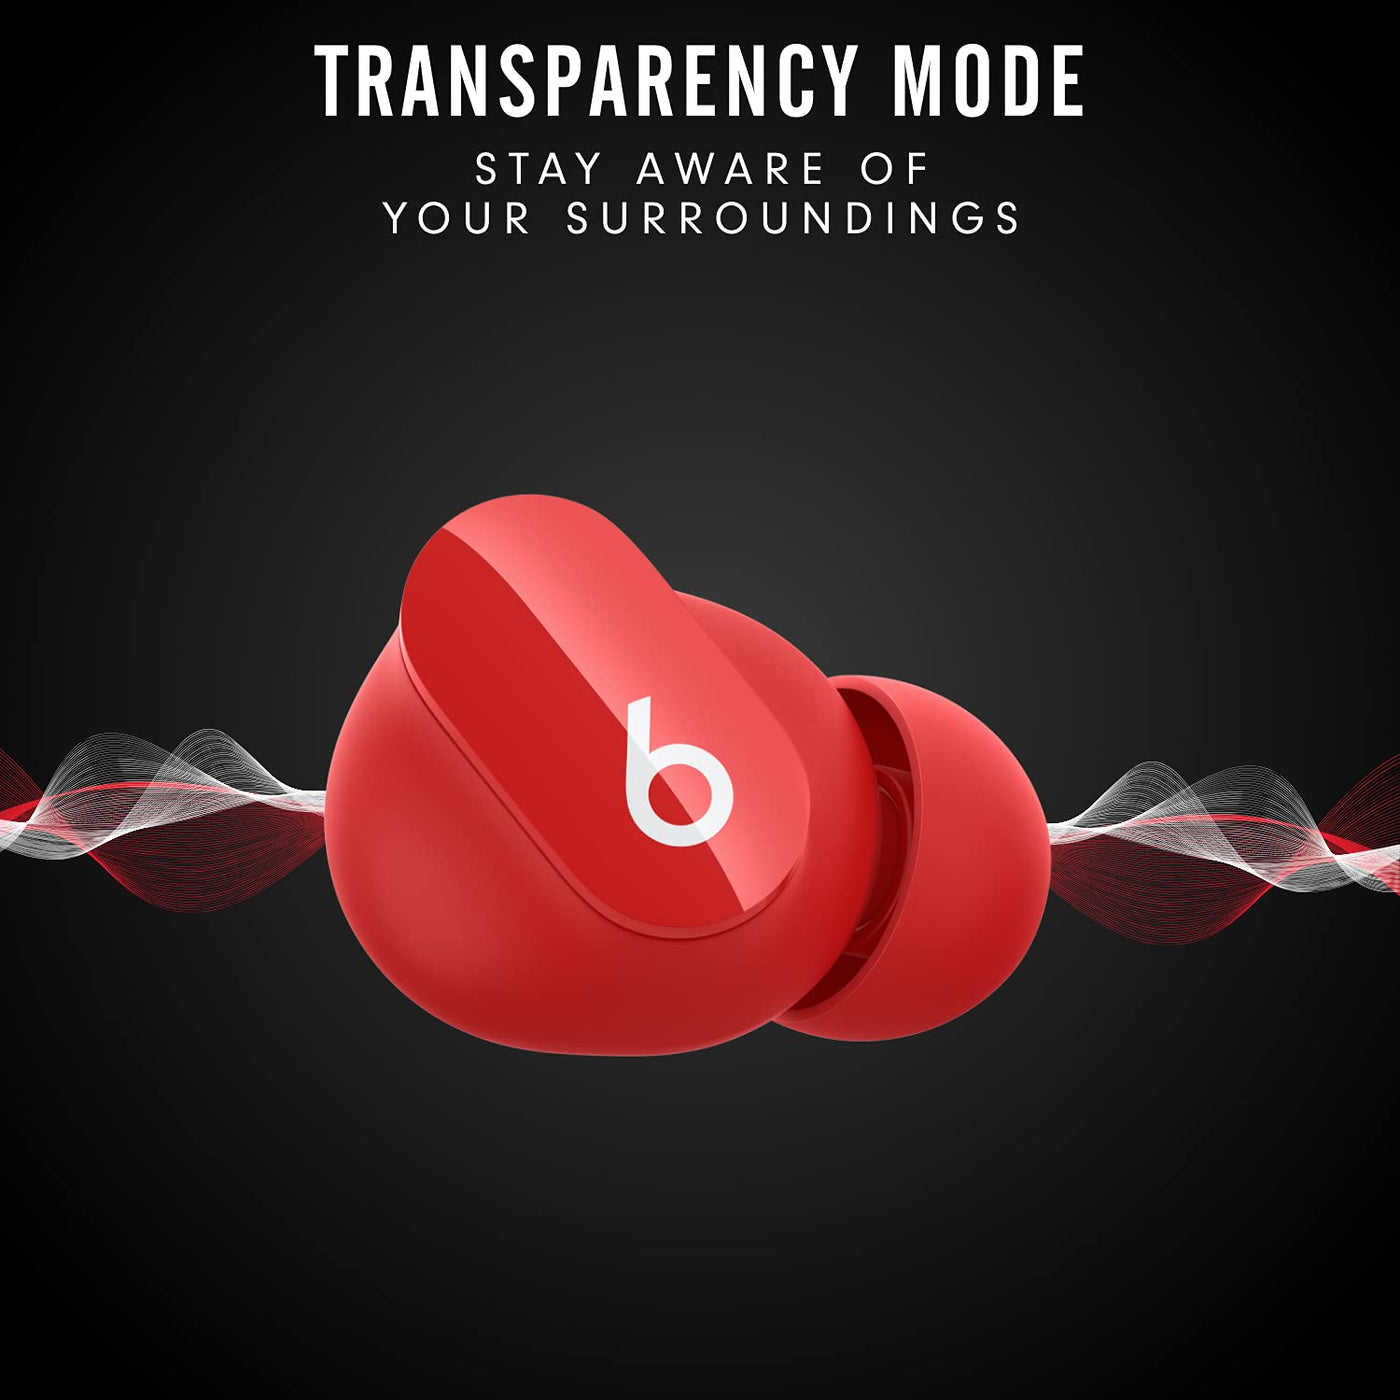 New Beats Studio Buds - True Wireless Noise Cancelling Earbuds - Com... Built-in Microphone, IPX4 Rating, Sweat Resistant Earphones - Red